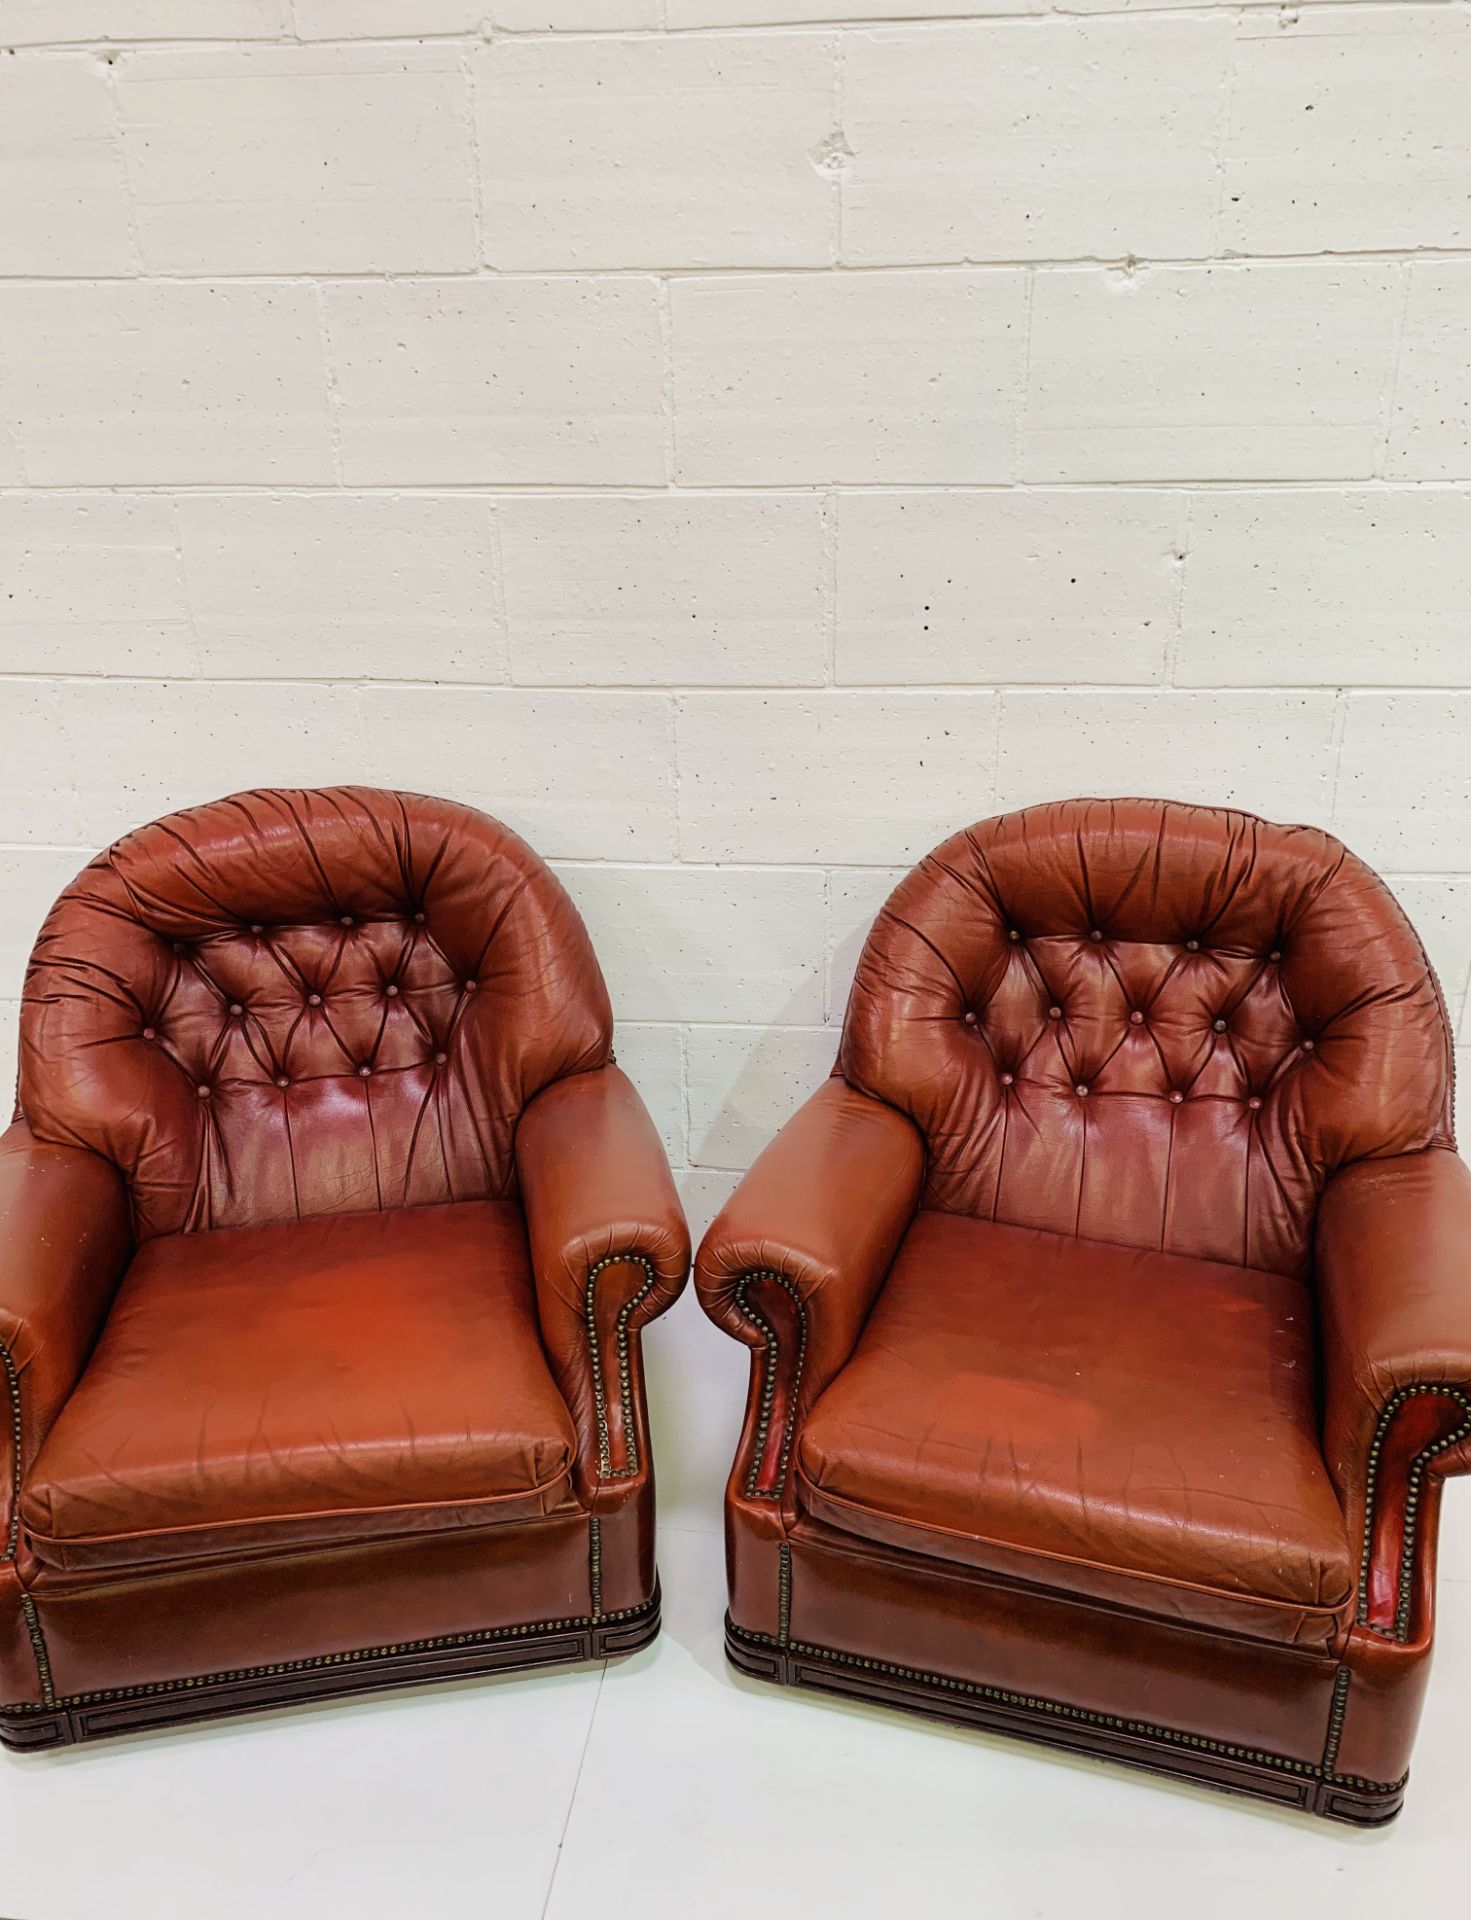 Pair of button back red leather arm chairs with studded trim to arms and back. - Image 2 of 4